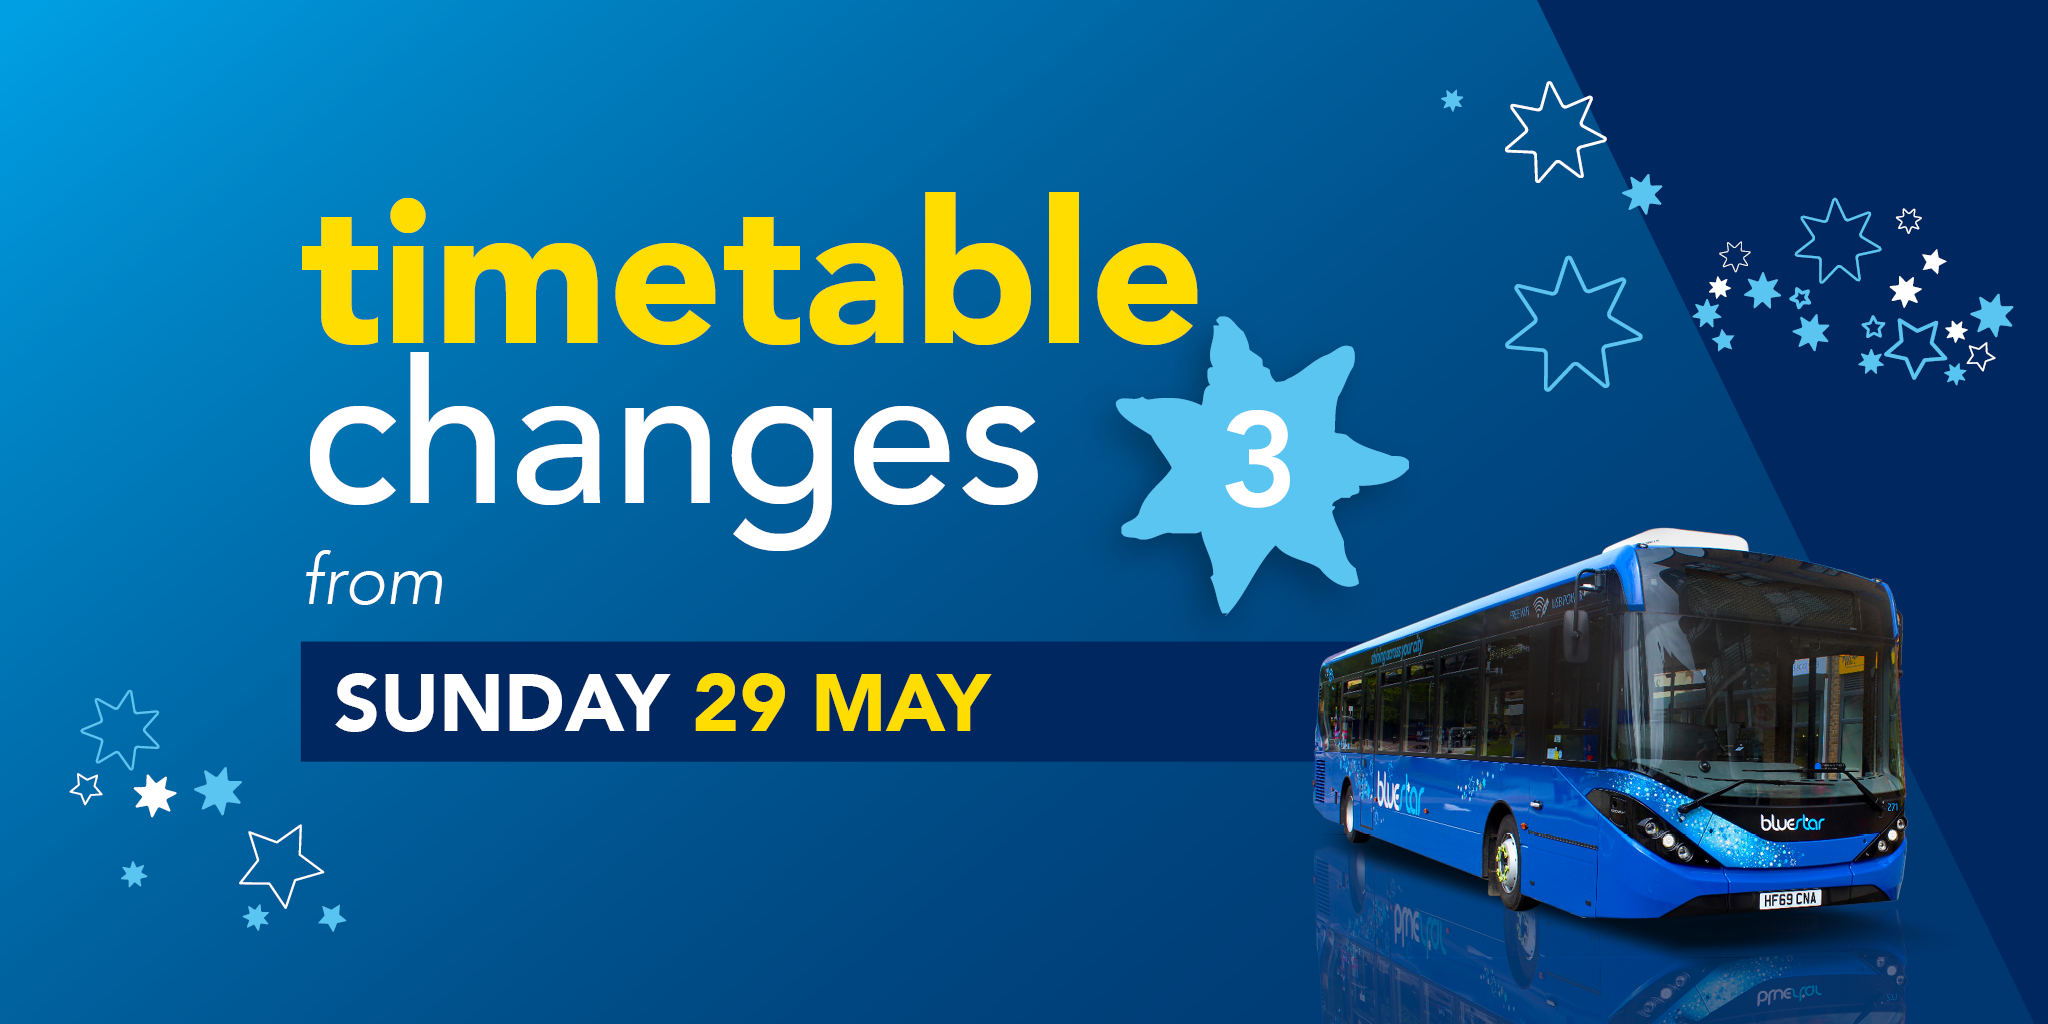 timetable changes from sunday 29th may - bluestar 3